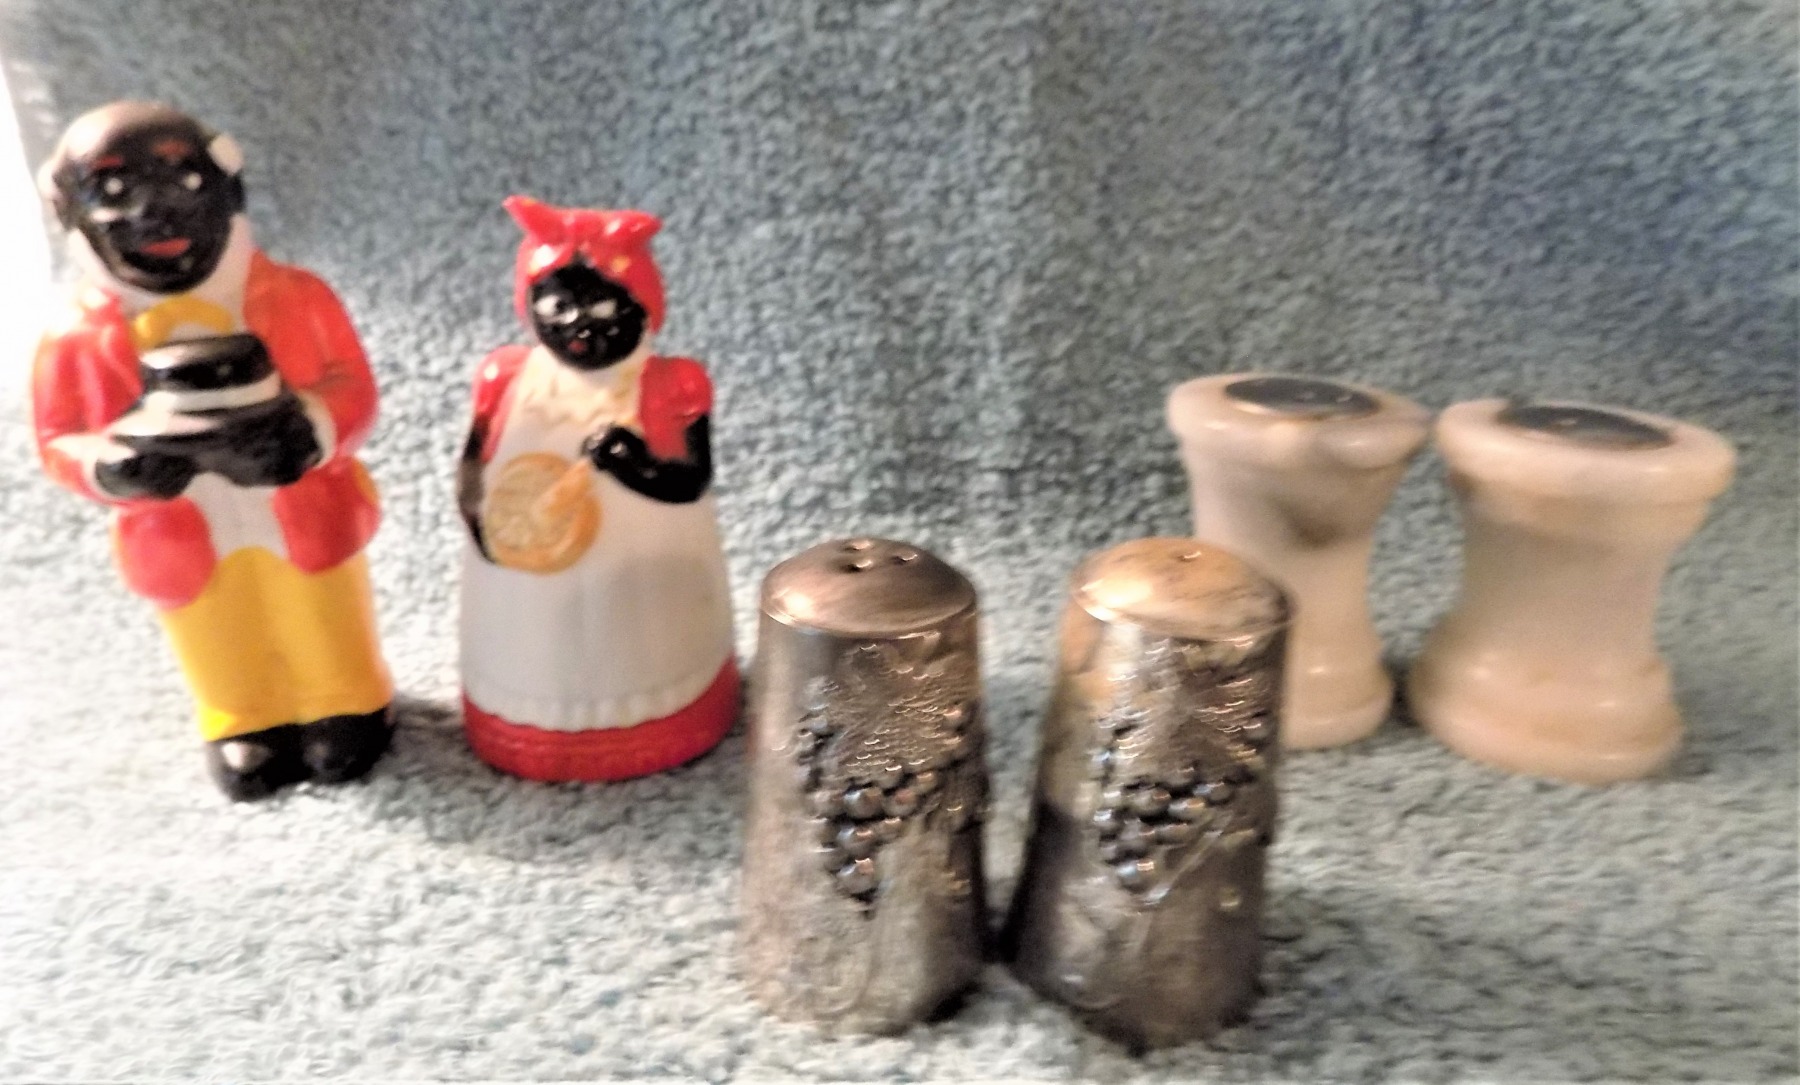 Antique Salt and Pepper Shakers 